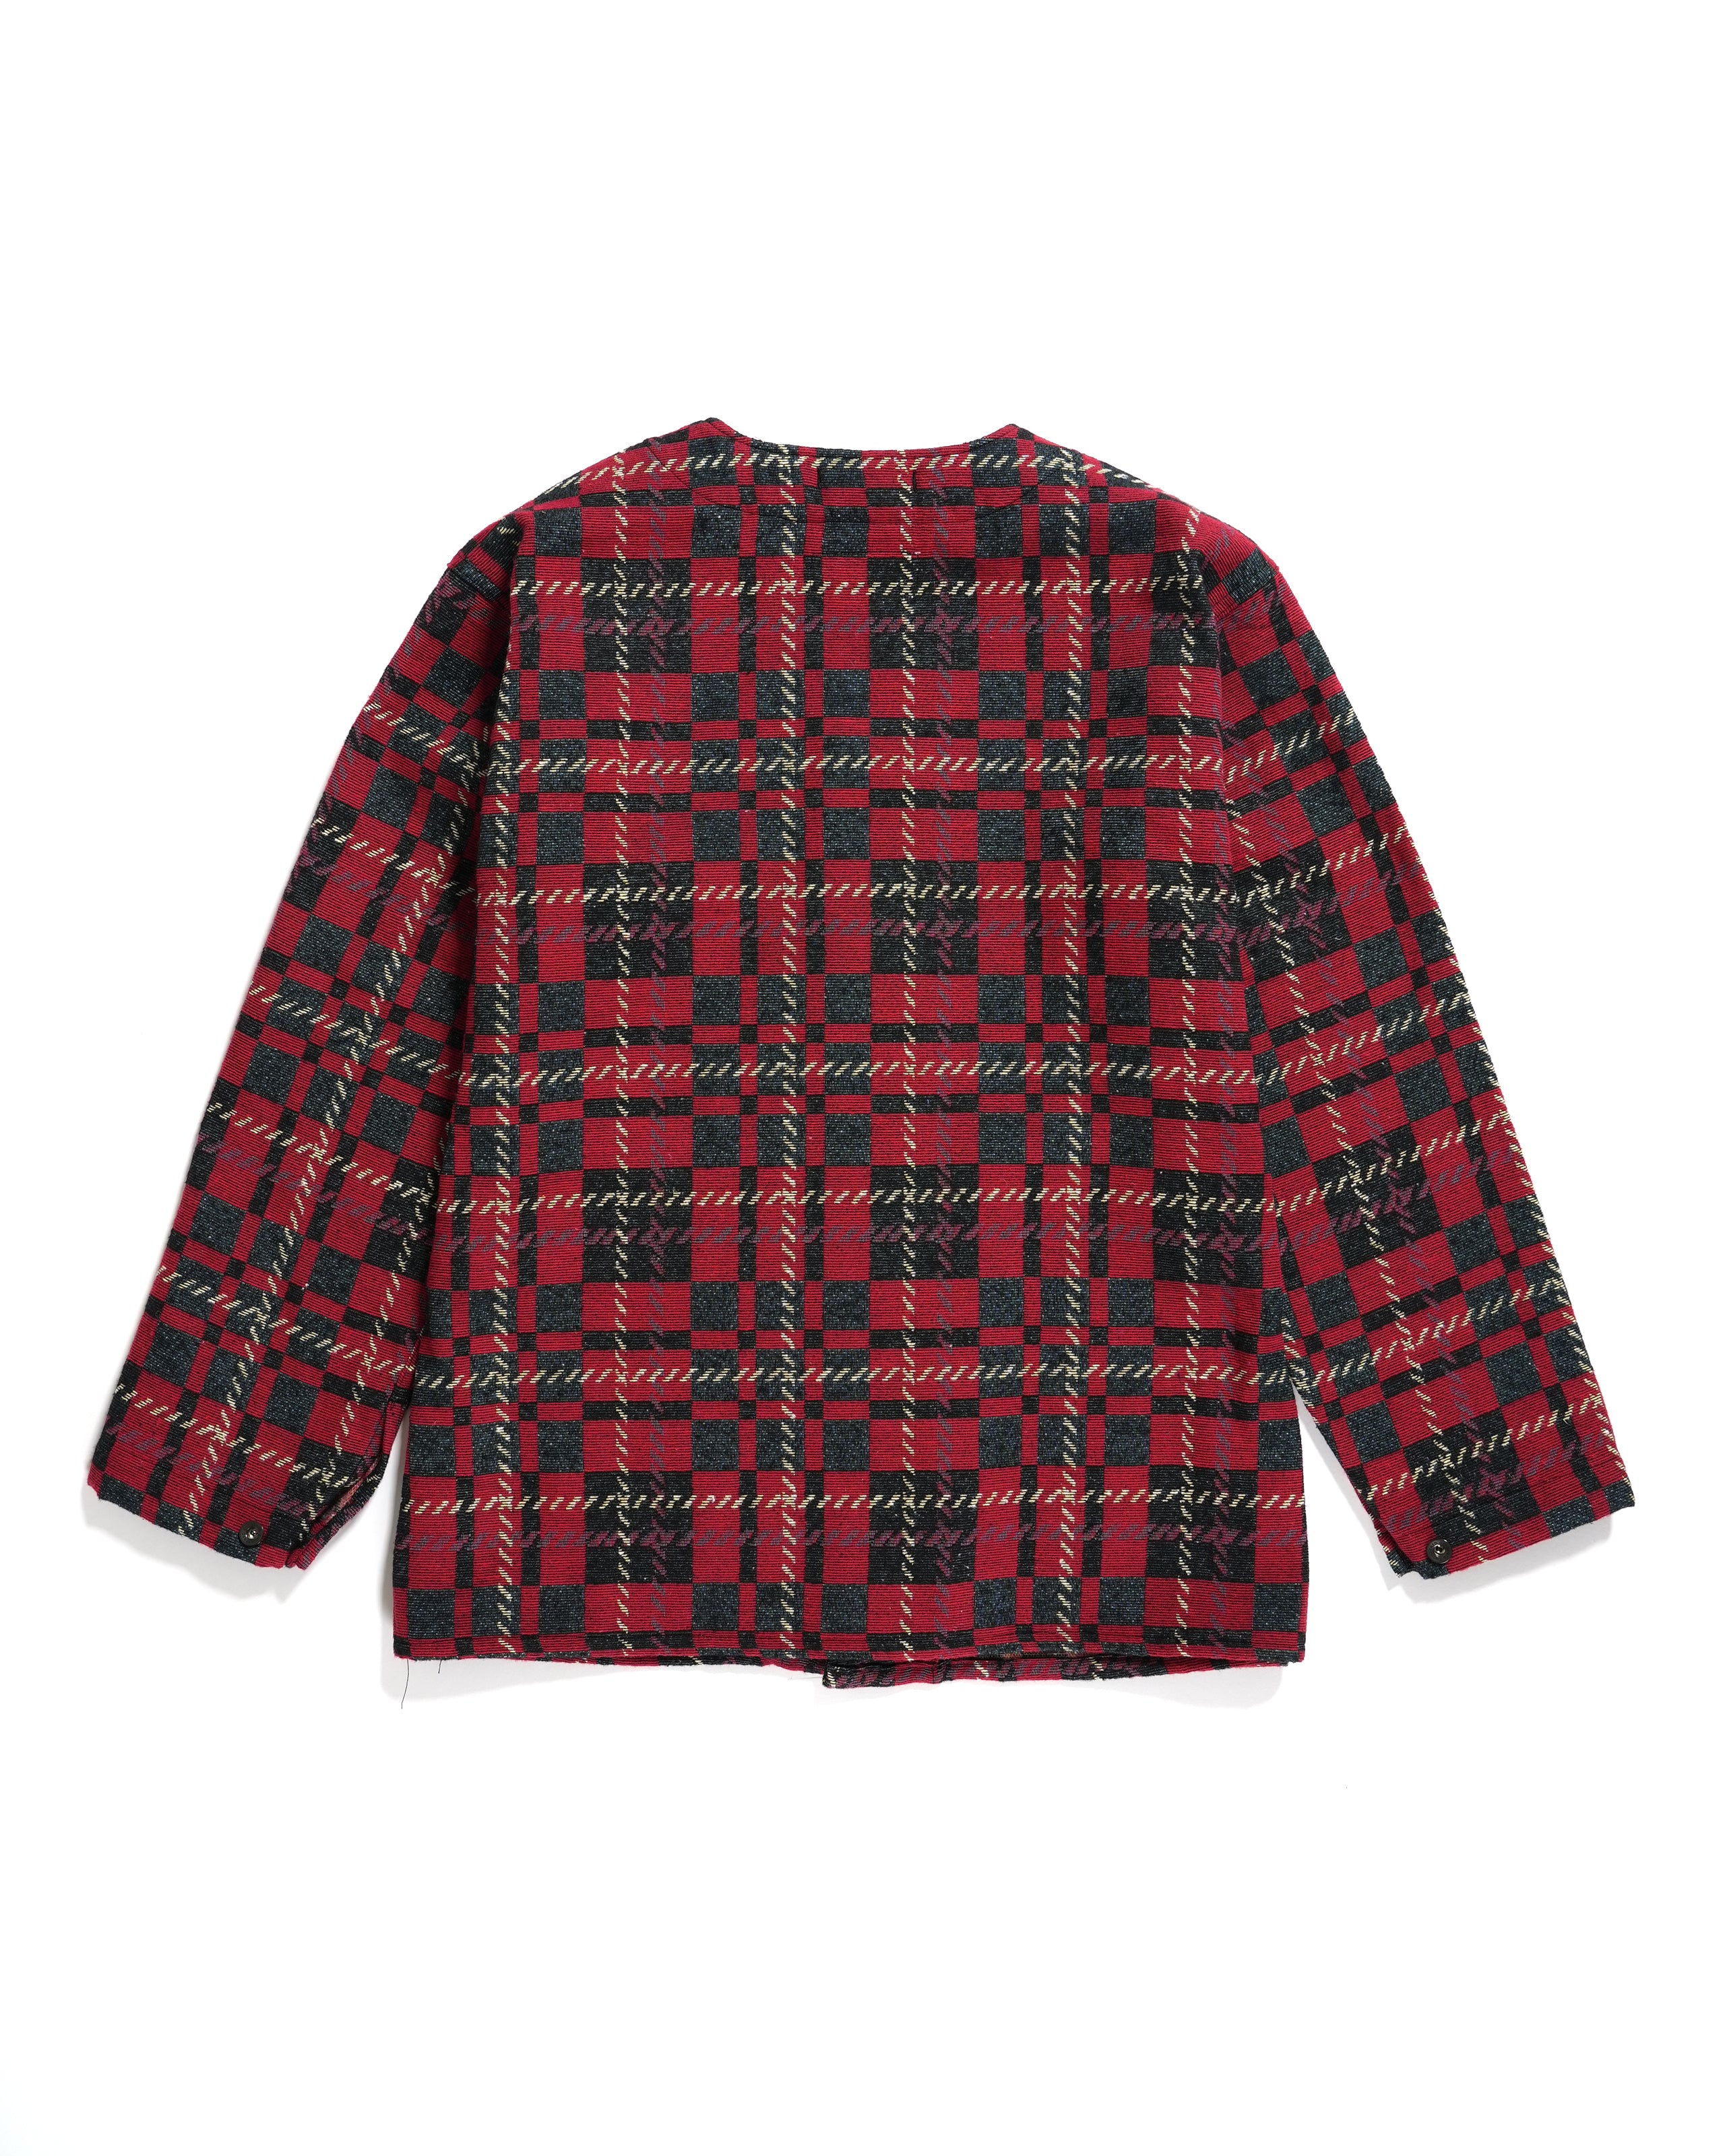 Engineer Jacket - Red / Charcoal Old Plaid Jacquard